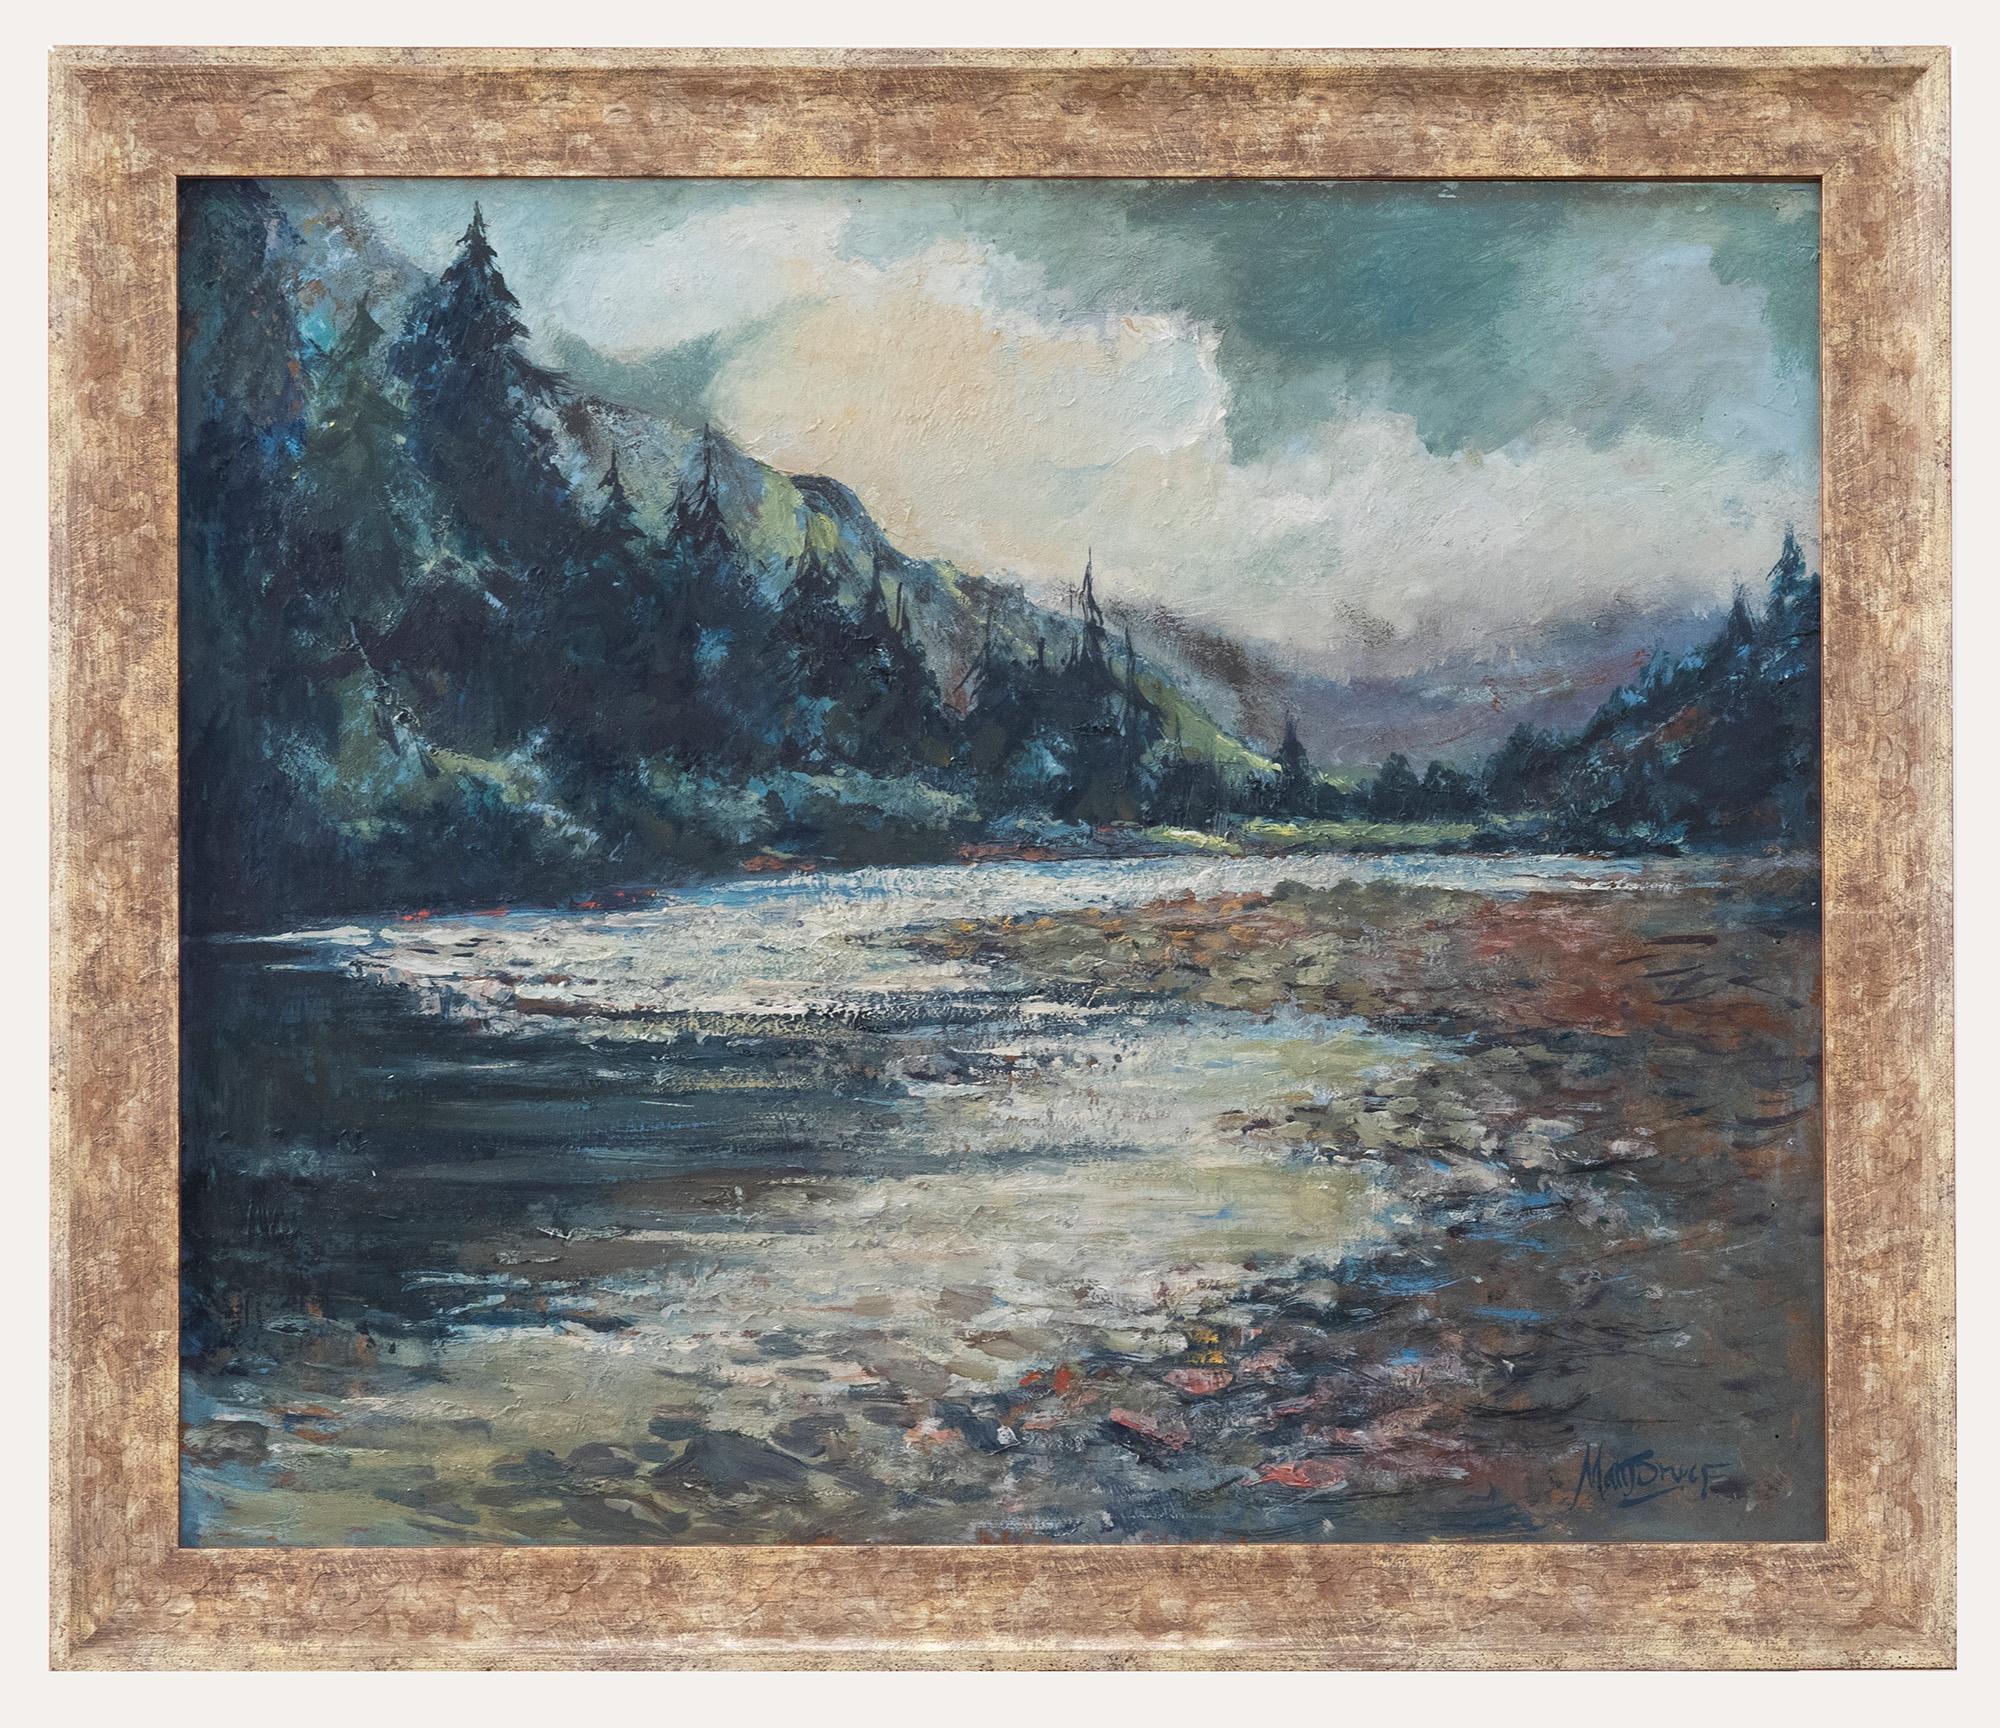 This dynamic oil depicts a forest view with fast flowing river rippling under stormy sky. The colour palette has been kept muted to help express the dramatic nature of this remote location. The artist has signed the scene to the lower right and the